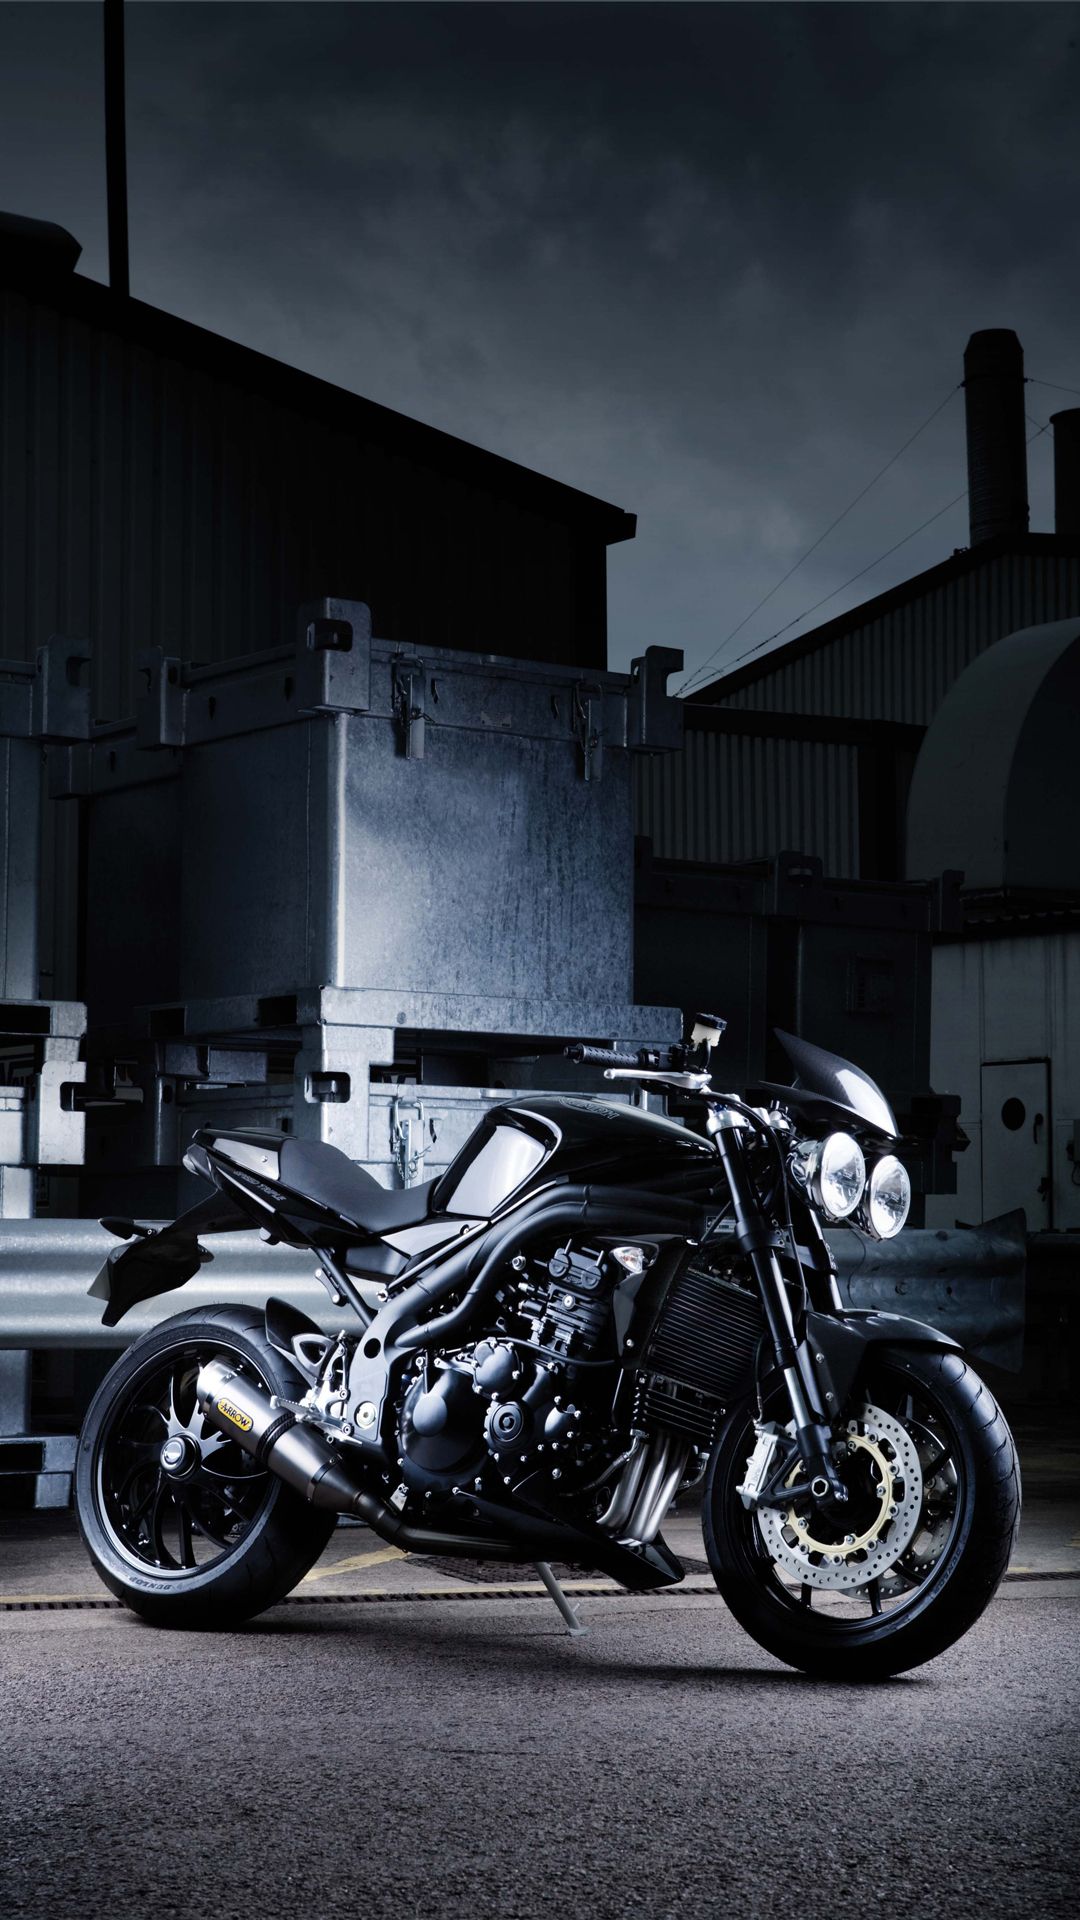 Triumph motorcycle htc one wallpaper, free and easy to